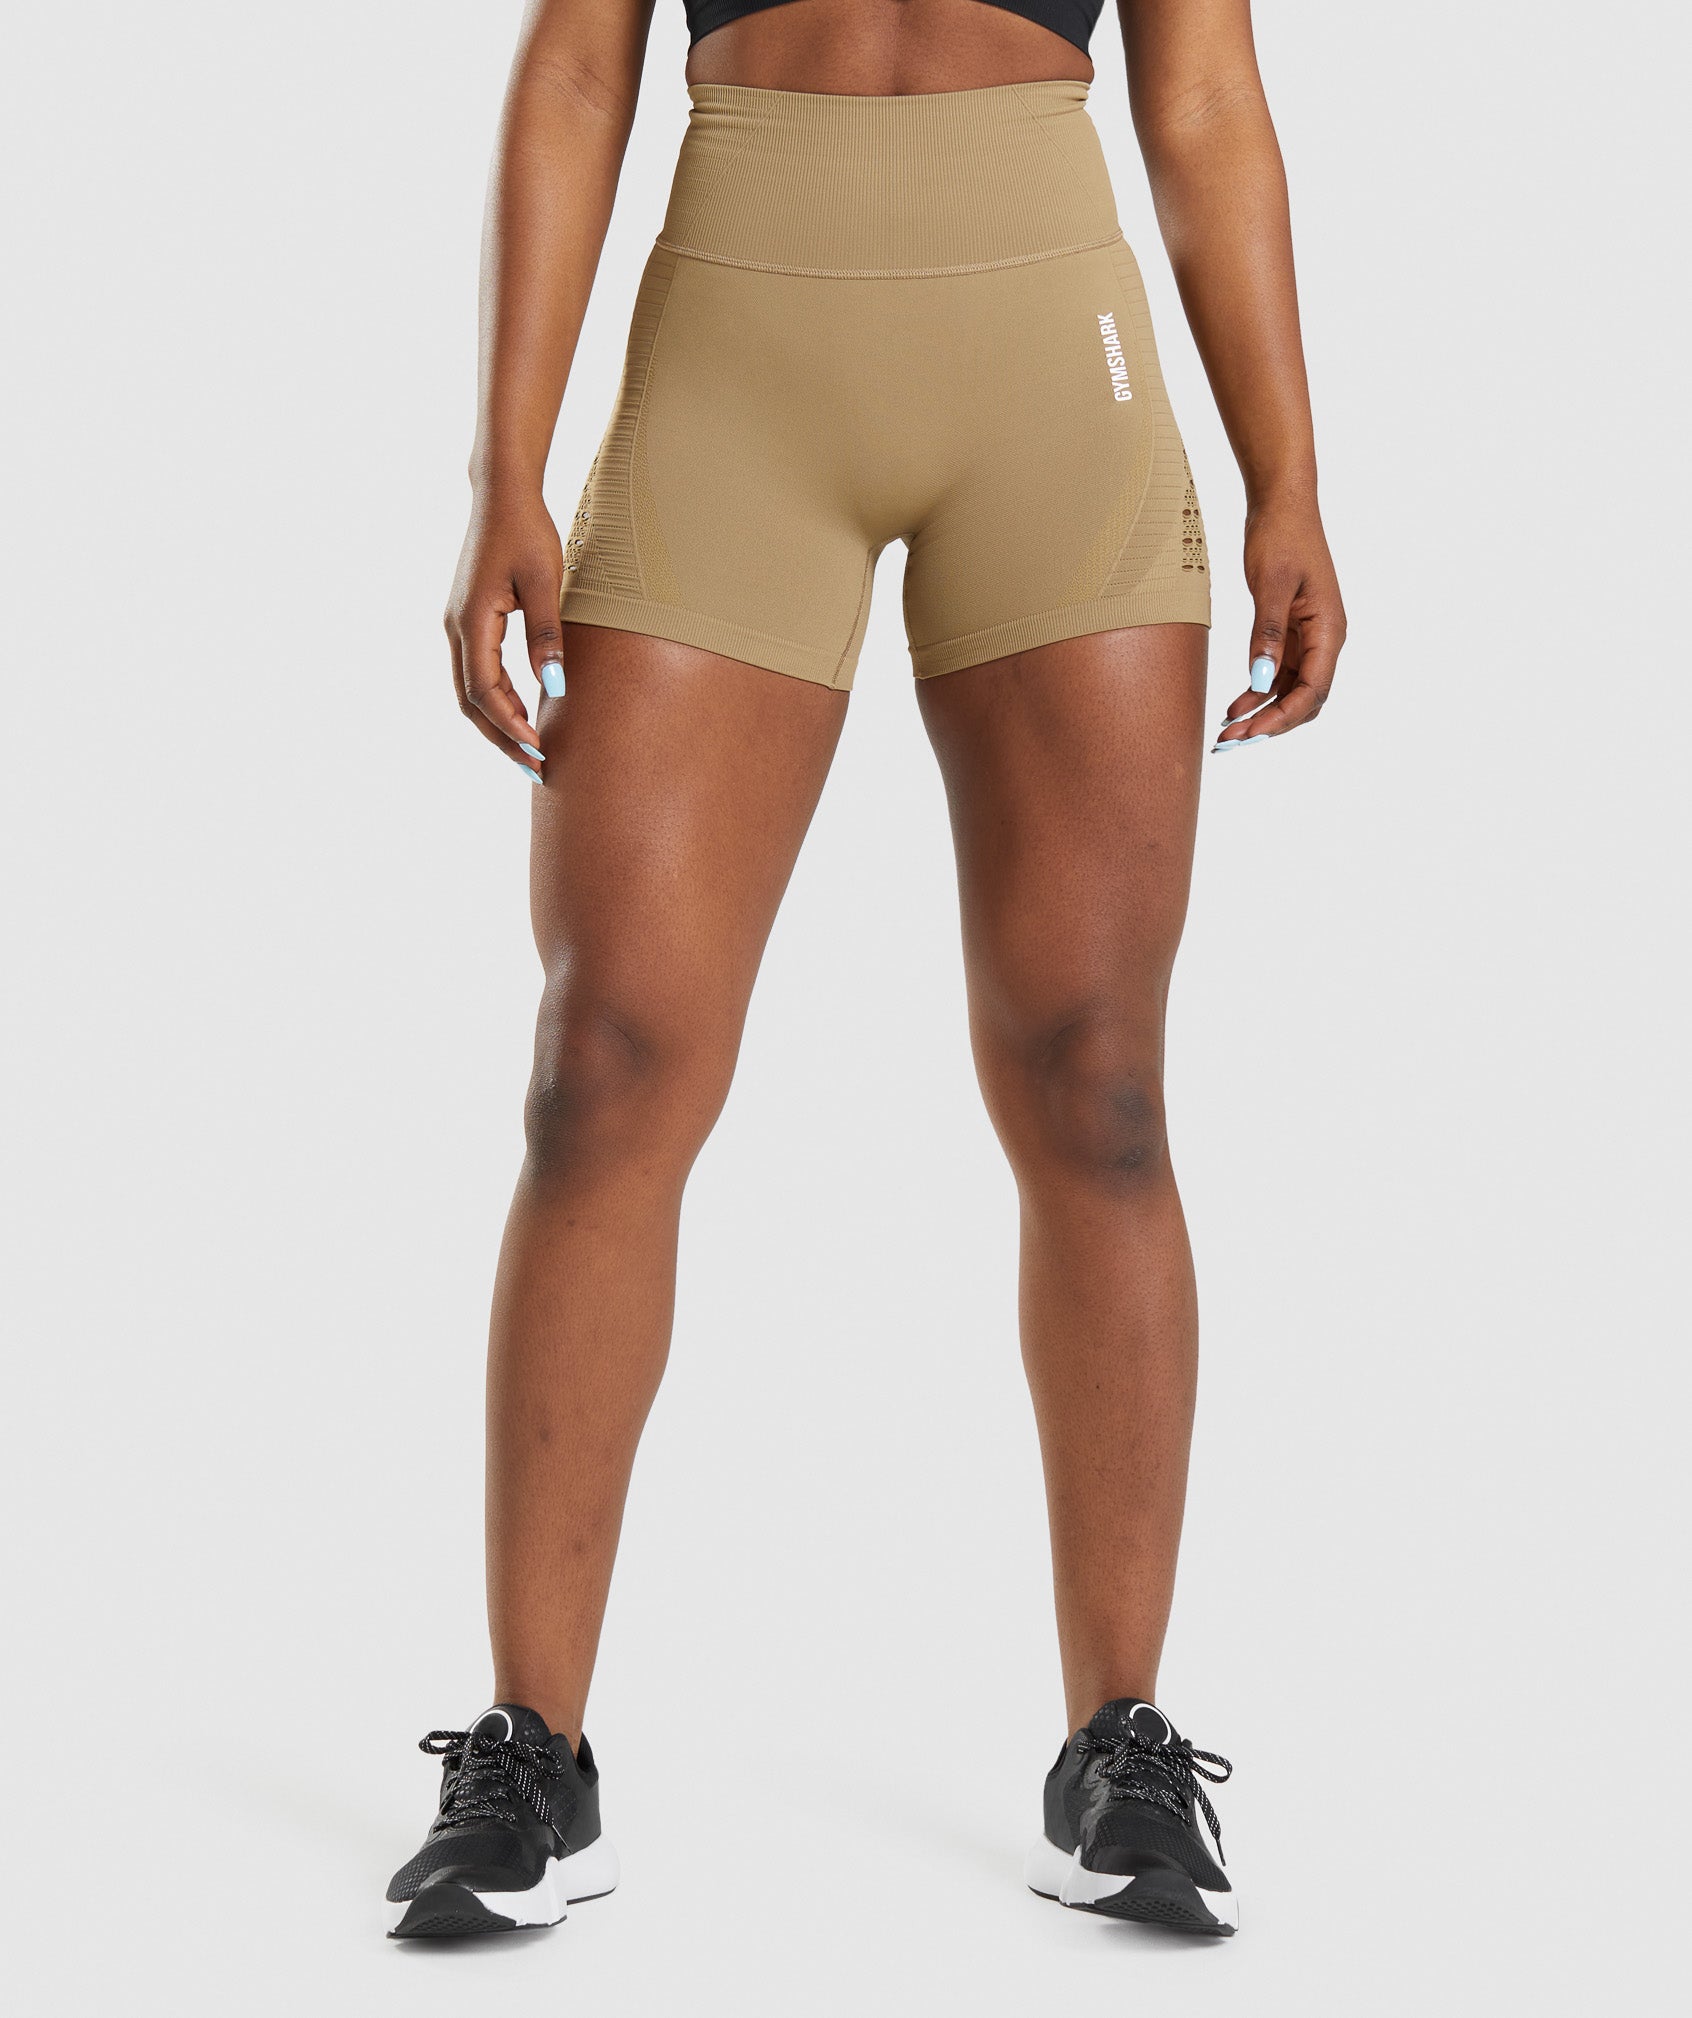 Gymshark Compression High Wasted Shorts Women's Energy+ Seamless Black Sz S